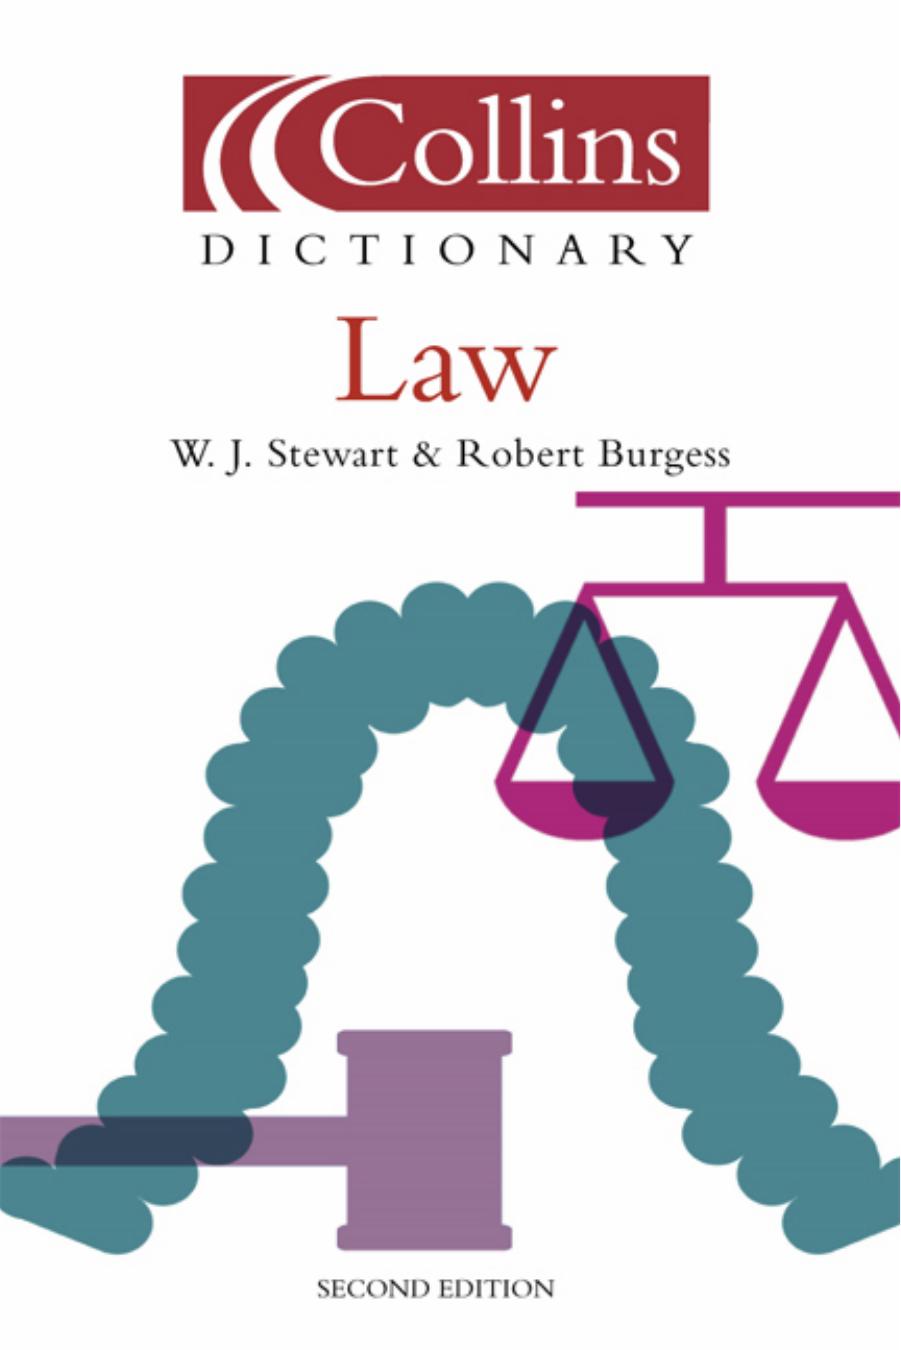 Collins Dictionary of Law